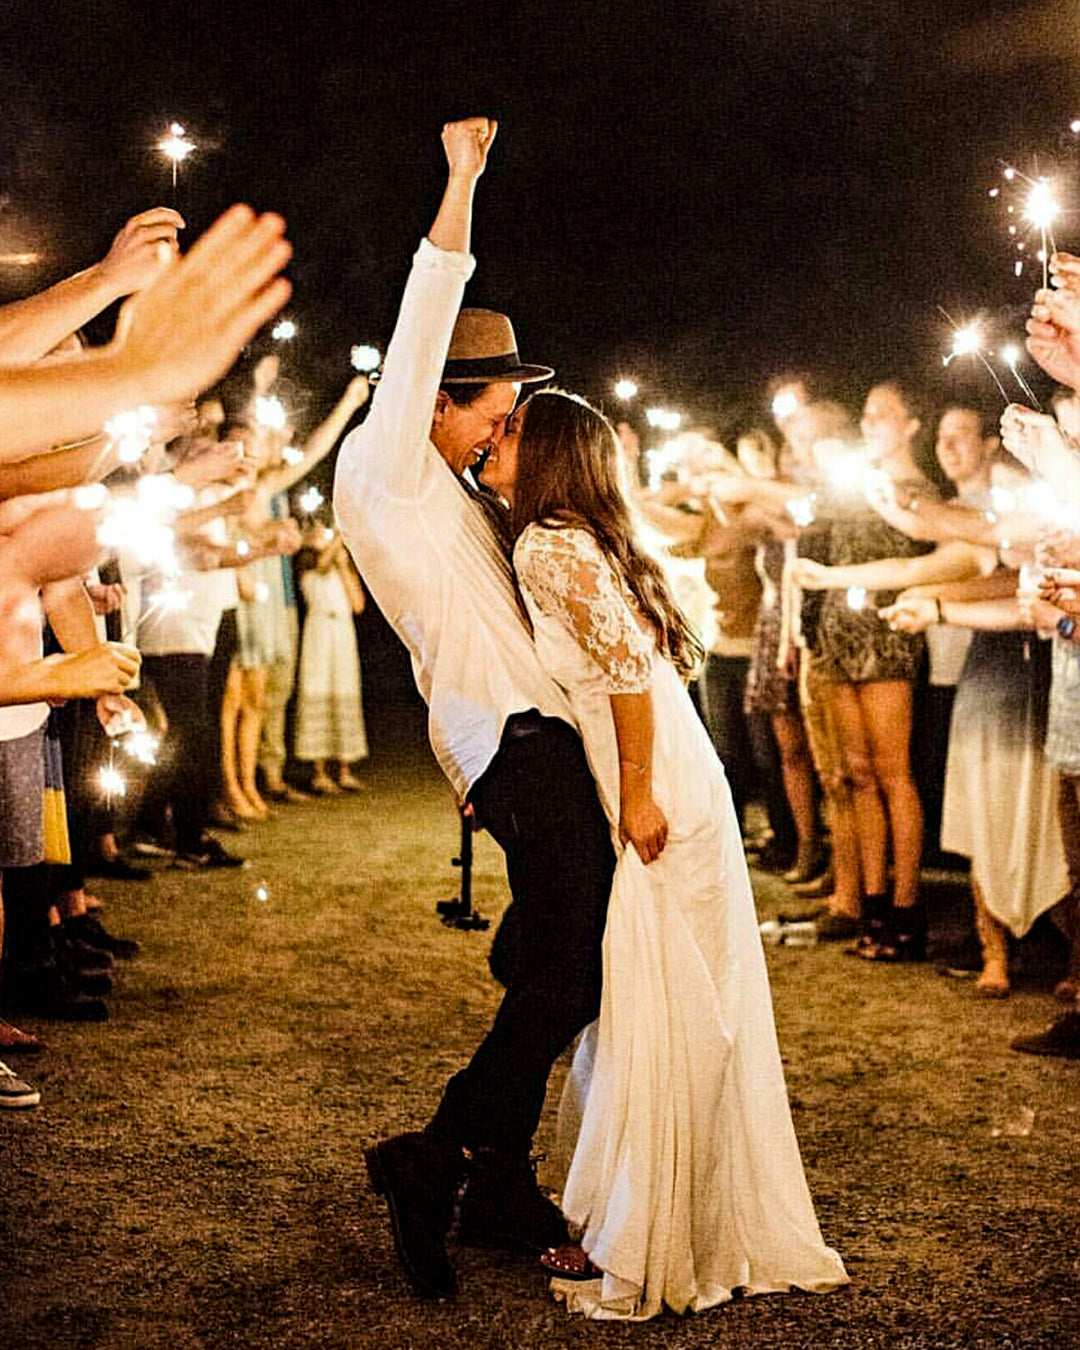 Photographer Tips for Sparklers at Weddings